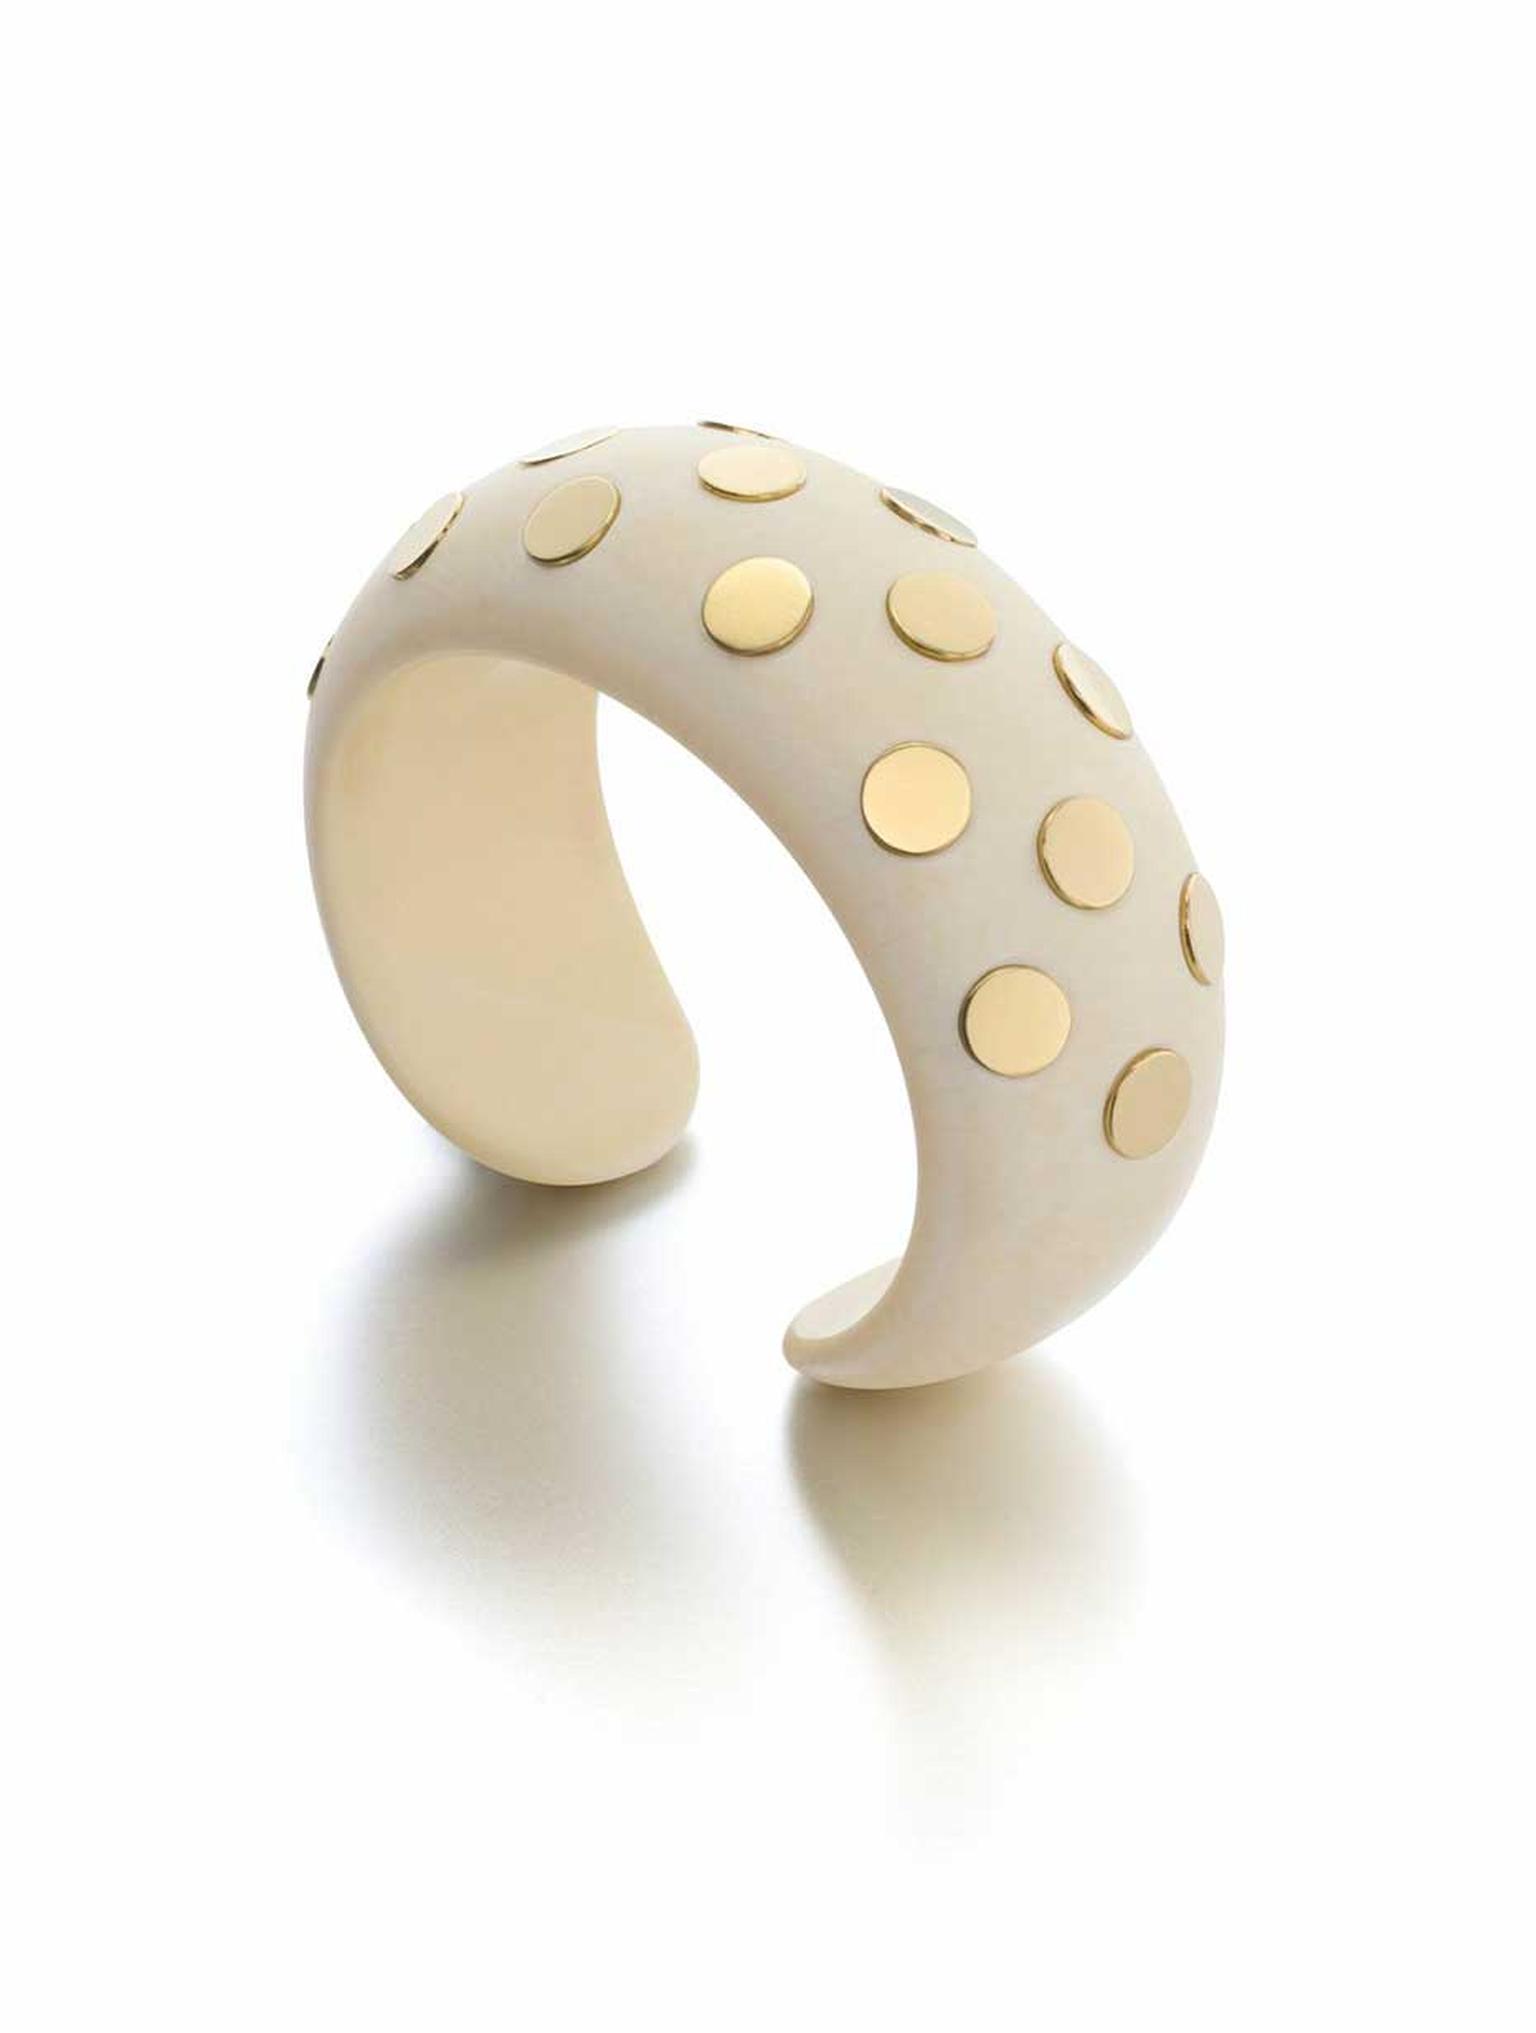 At Siegelson one will find the Suzanne Belperron and Jeanne Boivin Art Modern gold and ivory Tranche cuff, created for the house of René Boivin in 1931.